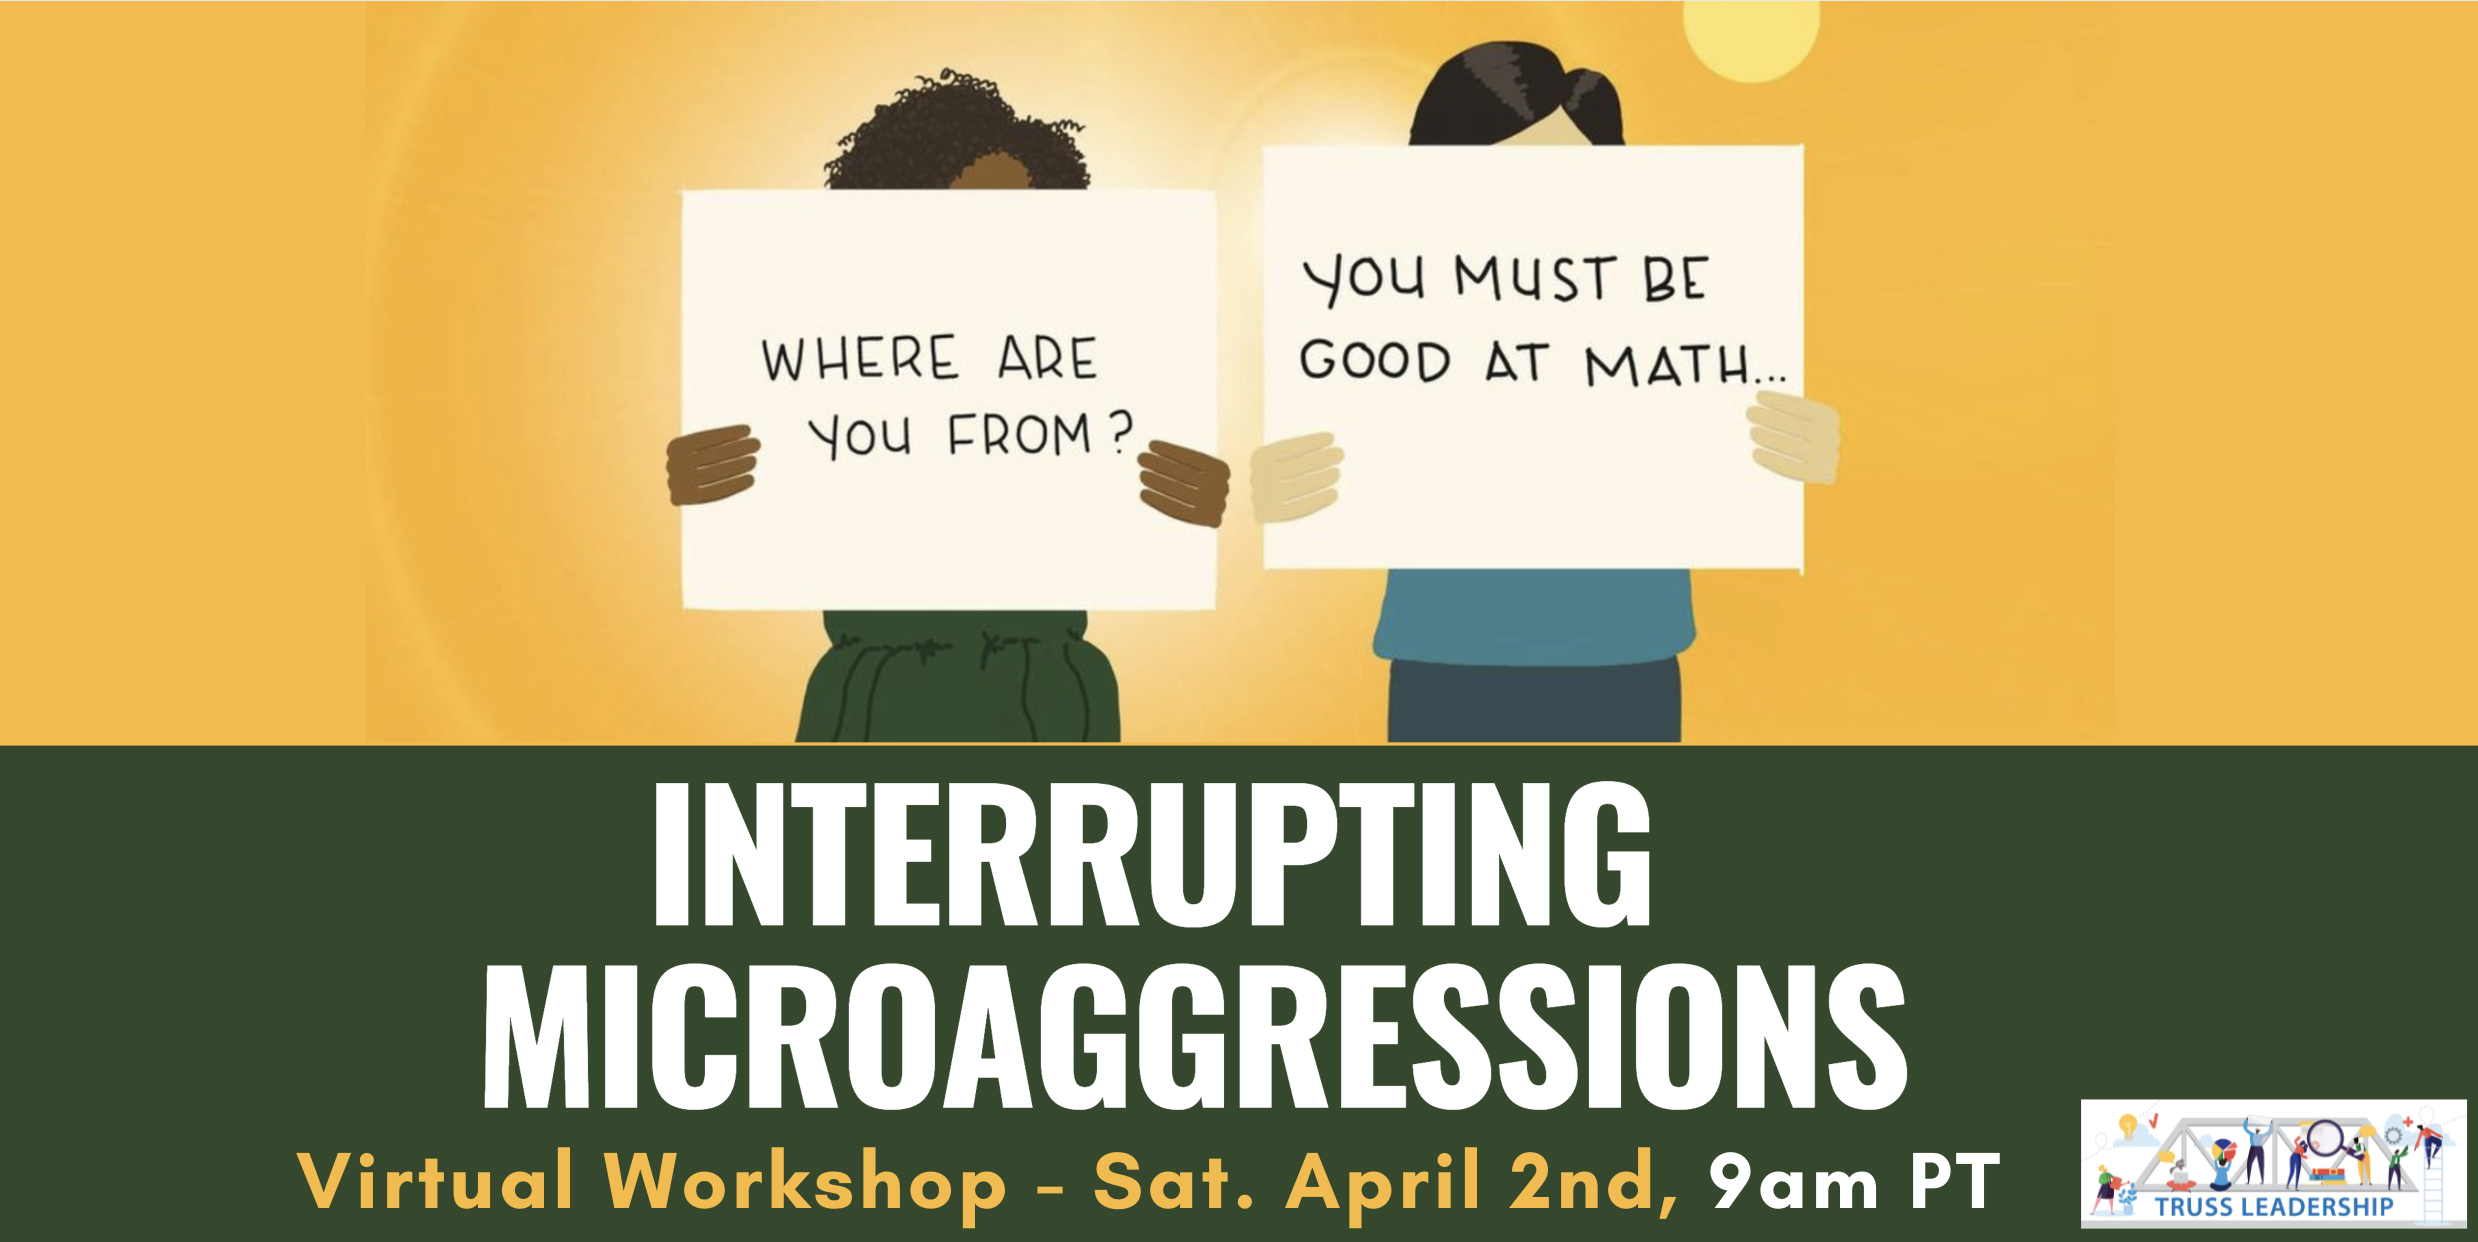 Graphic of two people holding signs that say Where are you from and You must be good at math. Graphic focuses on microaggressions and racial equity.